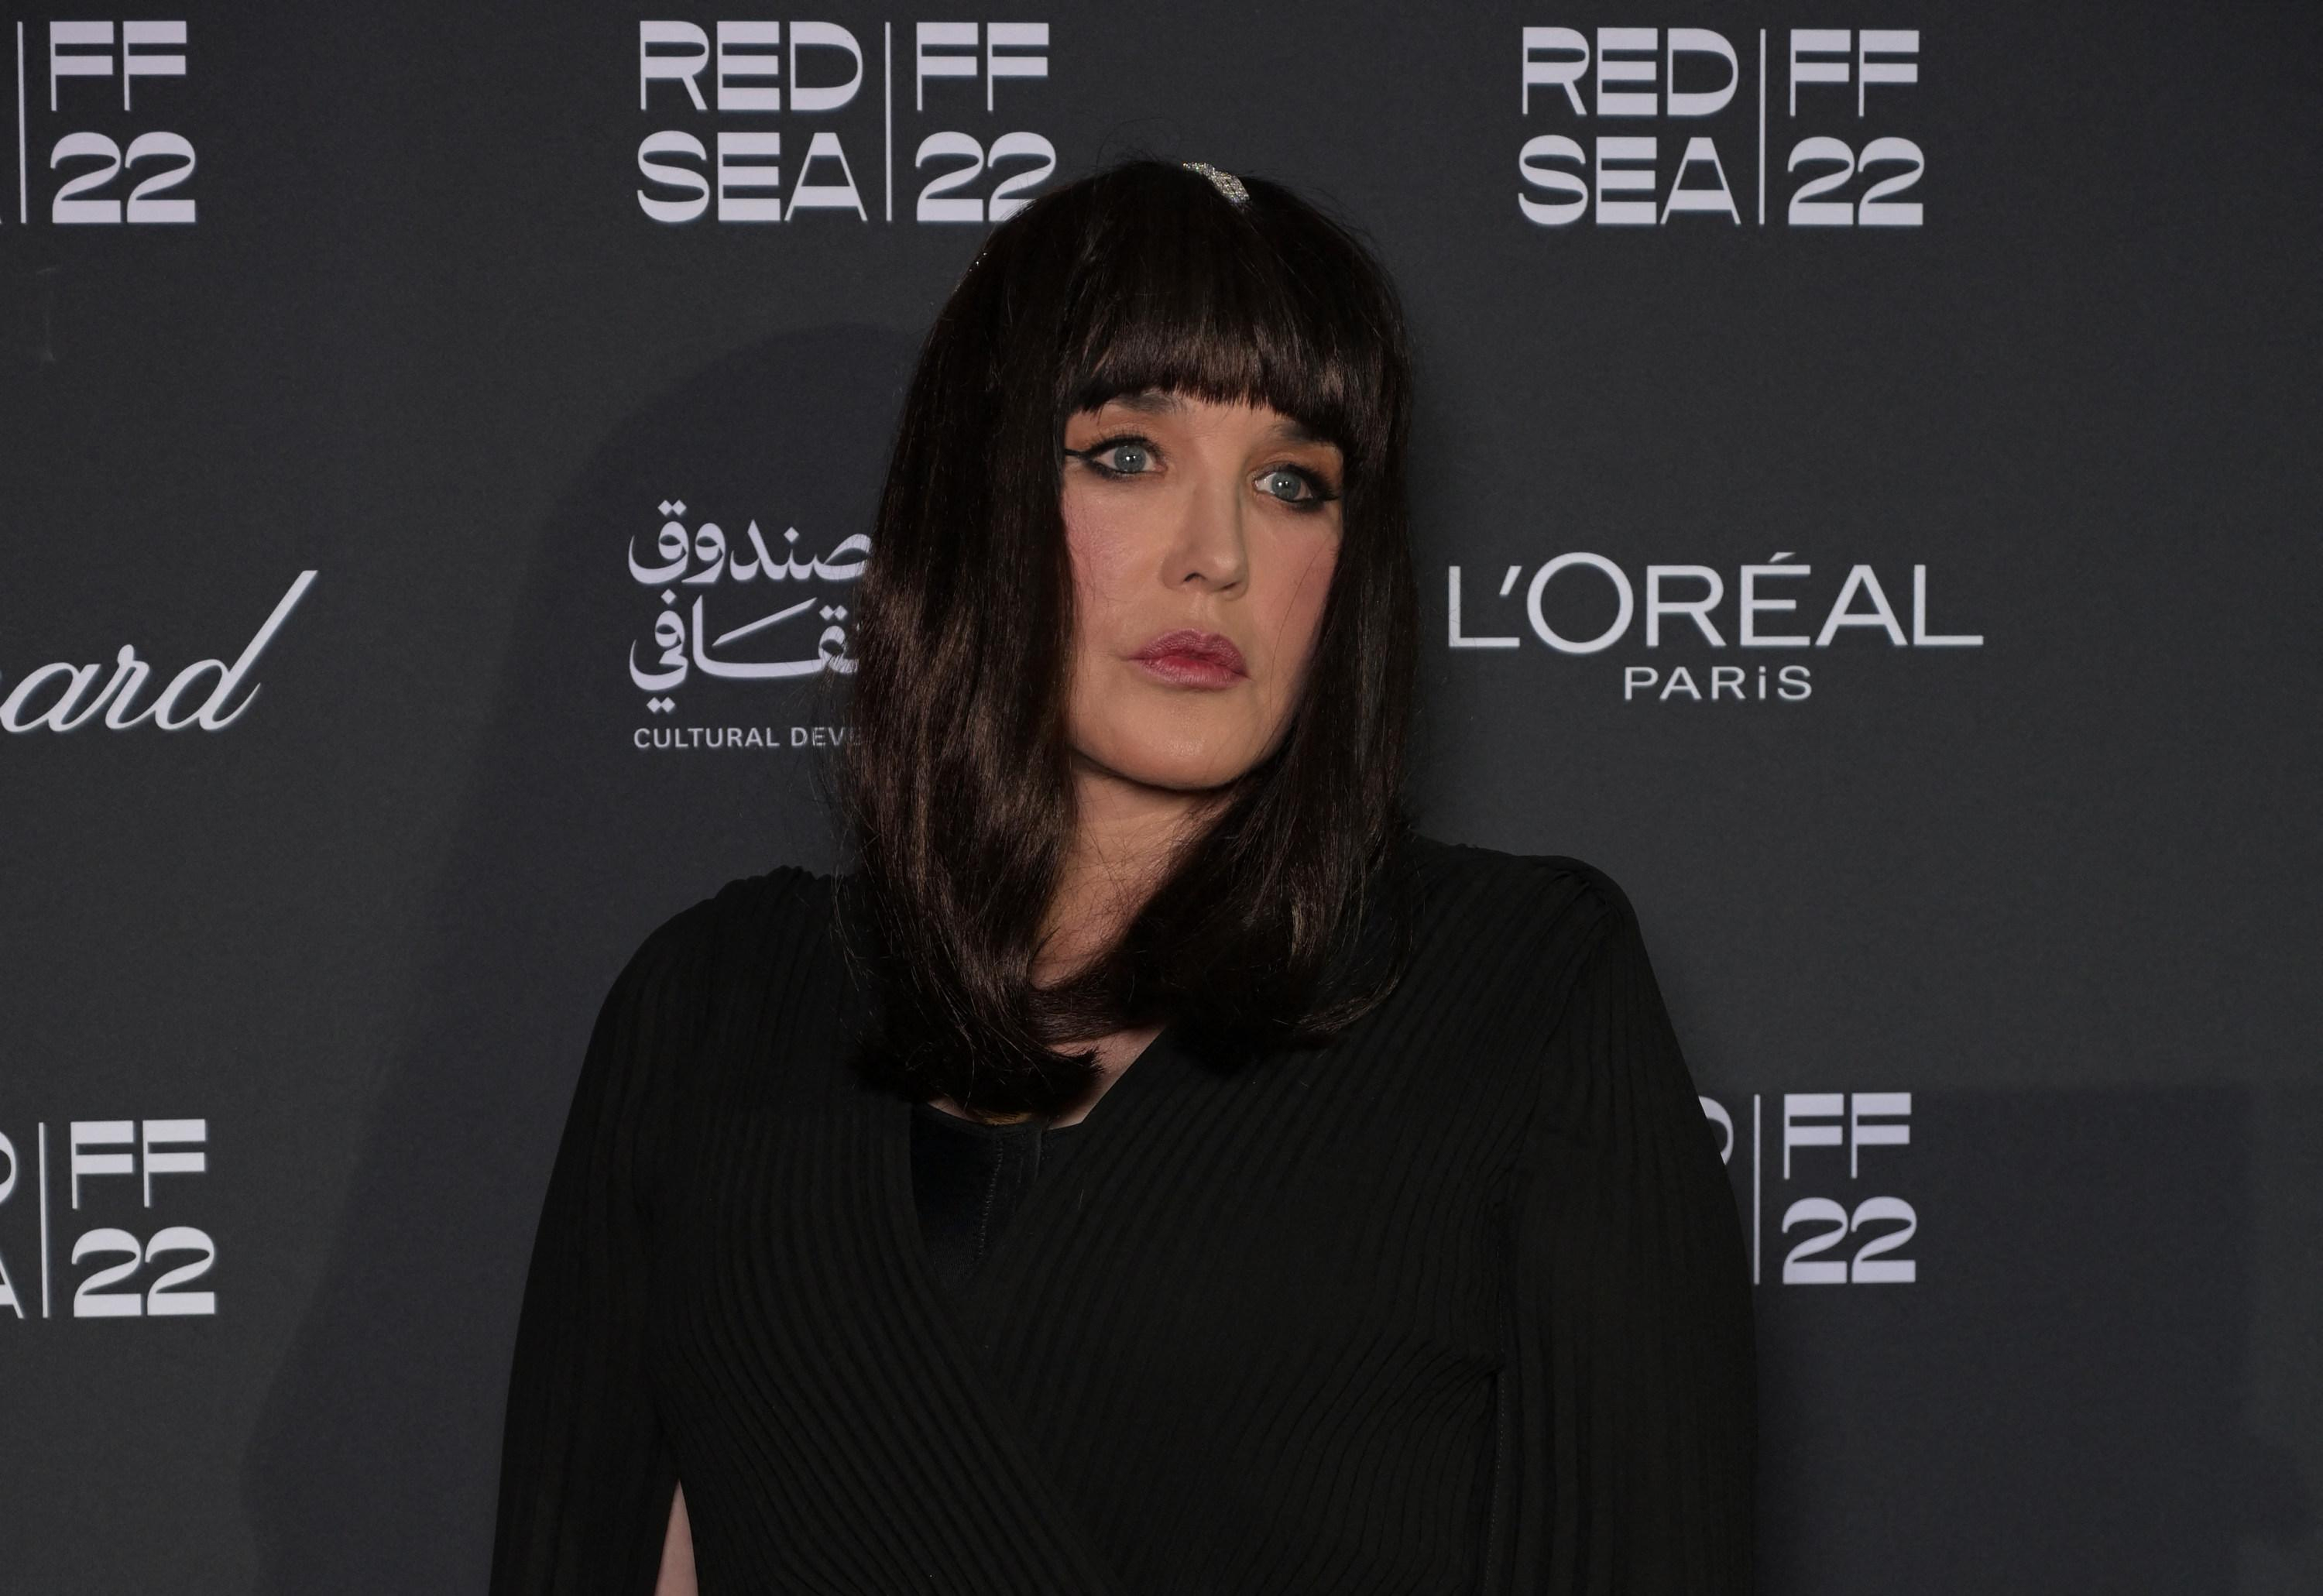 The prosecution requests a dismissal of charges for Isabelle Adjani, indicted for fraud since 2020